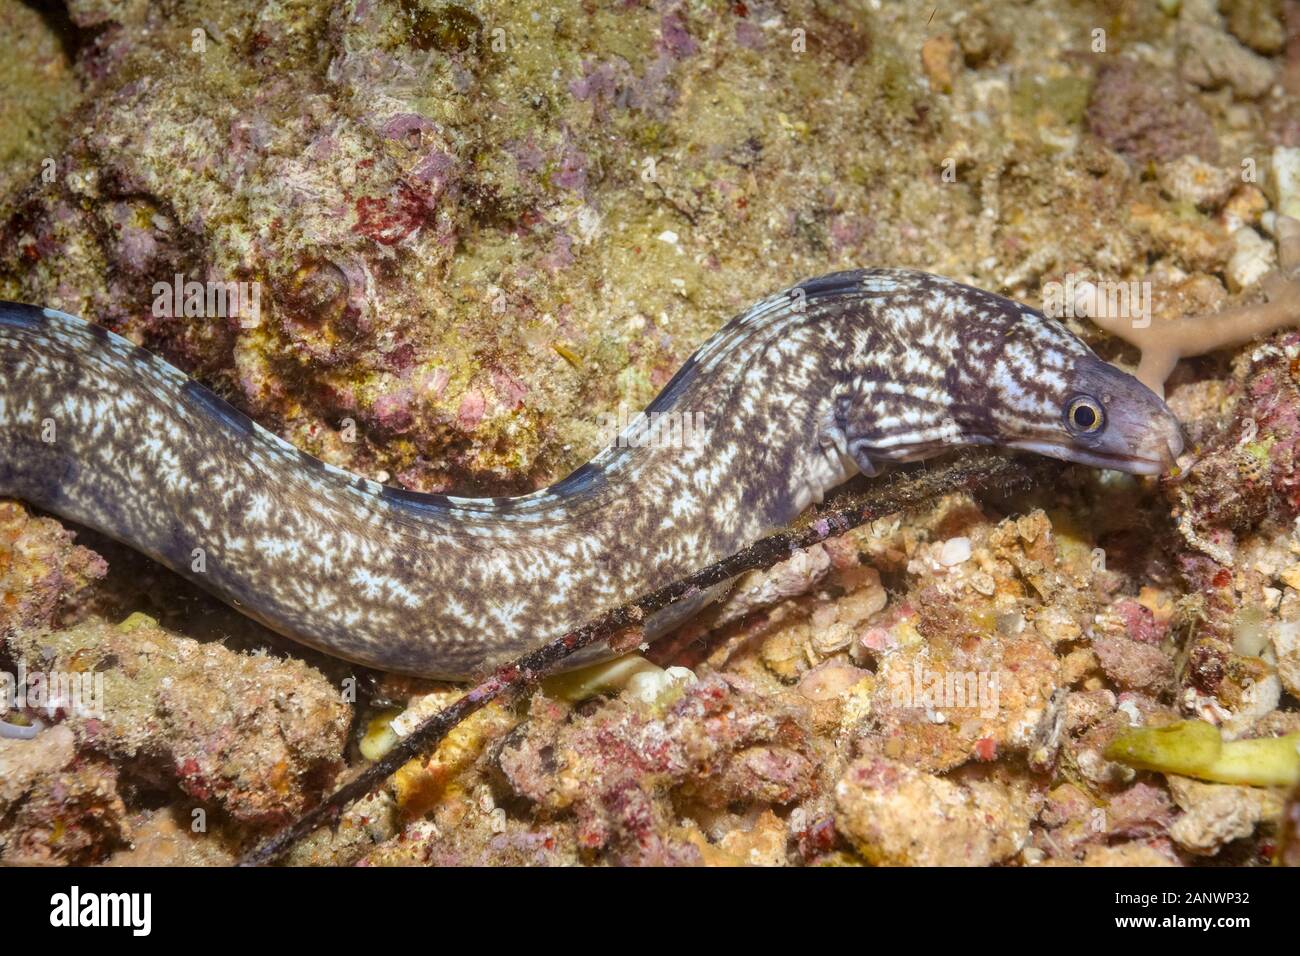 enigmatic moray eel, Gymnothorax enigmaticus, also known as the tiger moray or banded moray, Madang; Papua New Guinea; Pacific Ocean Stock Photo